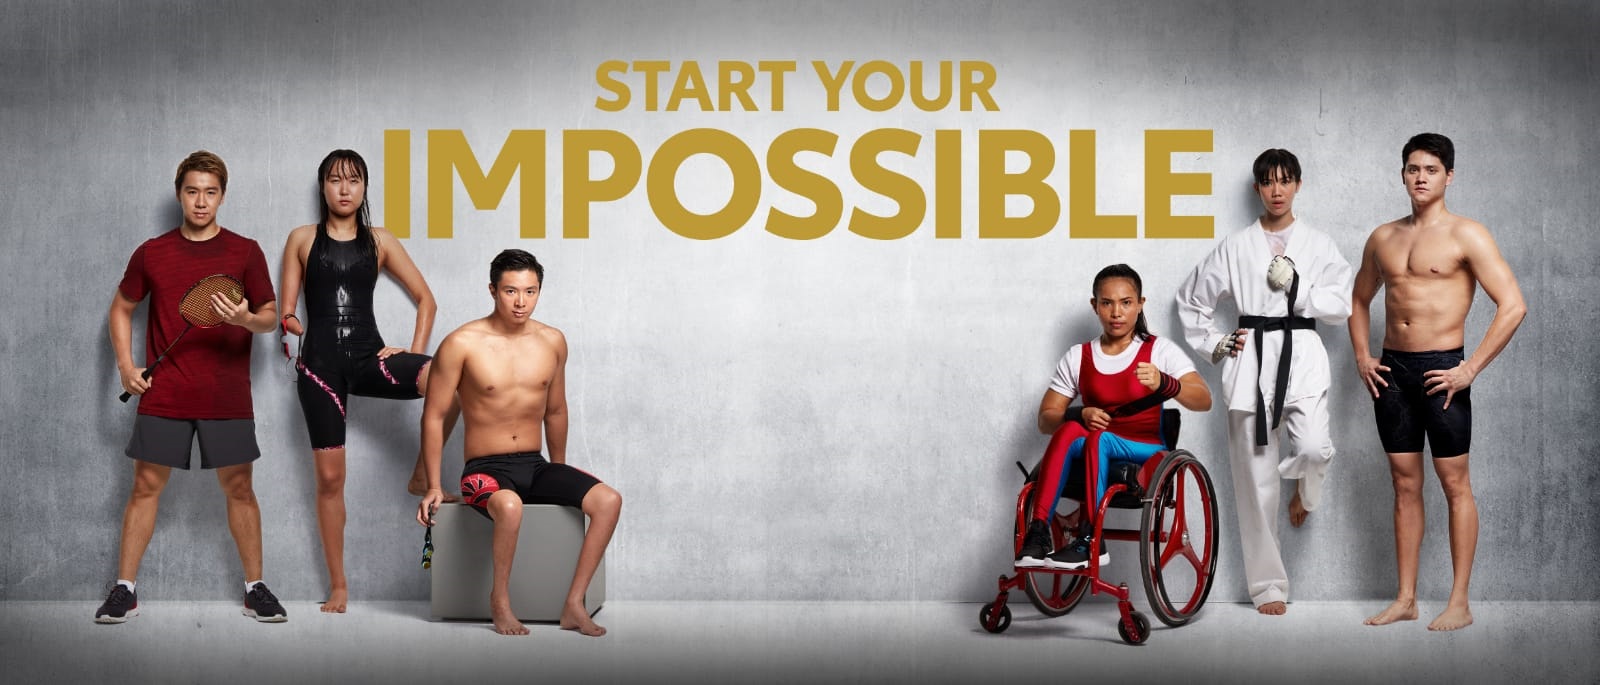 Start your Impossible - Toyota